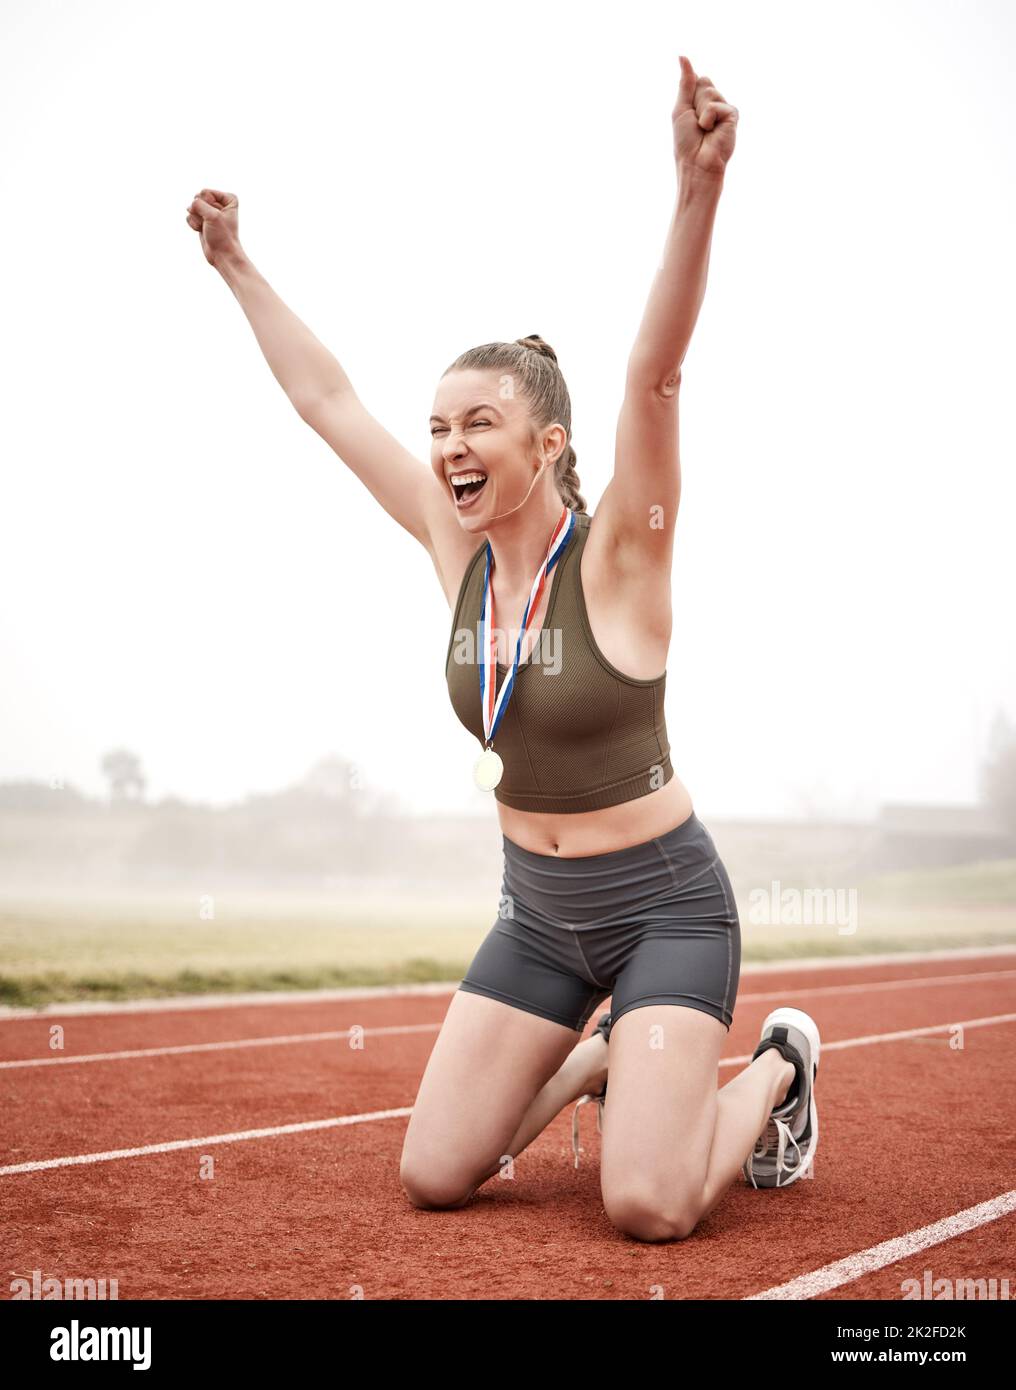 The right attitude will get you far. Shot of a young female athlete celebrating her run. Stock Photo